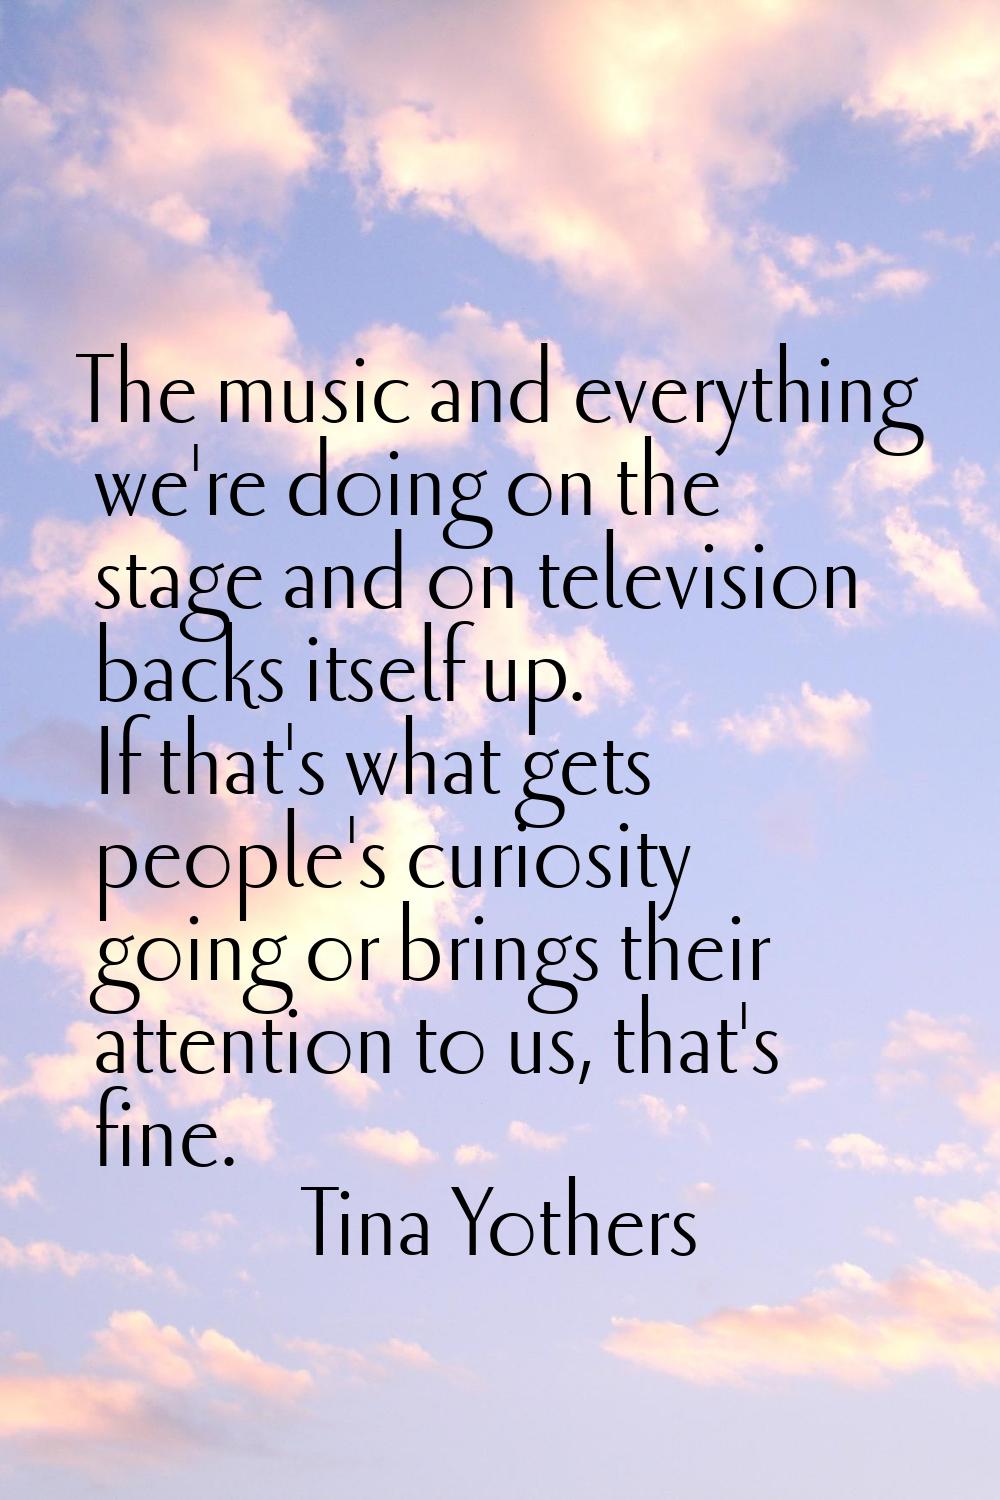 The music and everything we're doing on the stage and on television backs itself up. If that's what